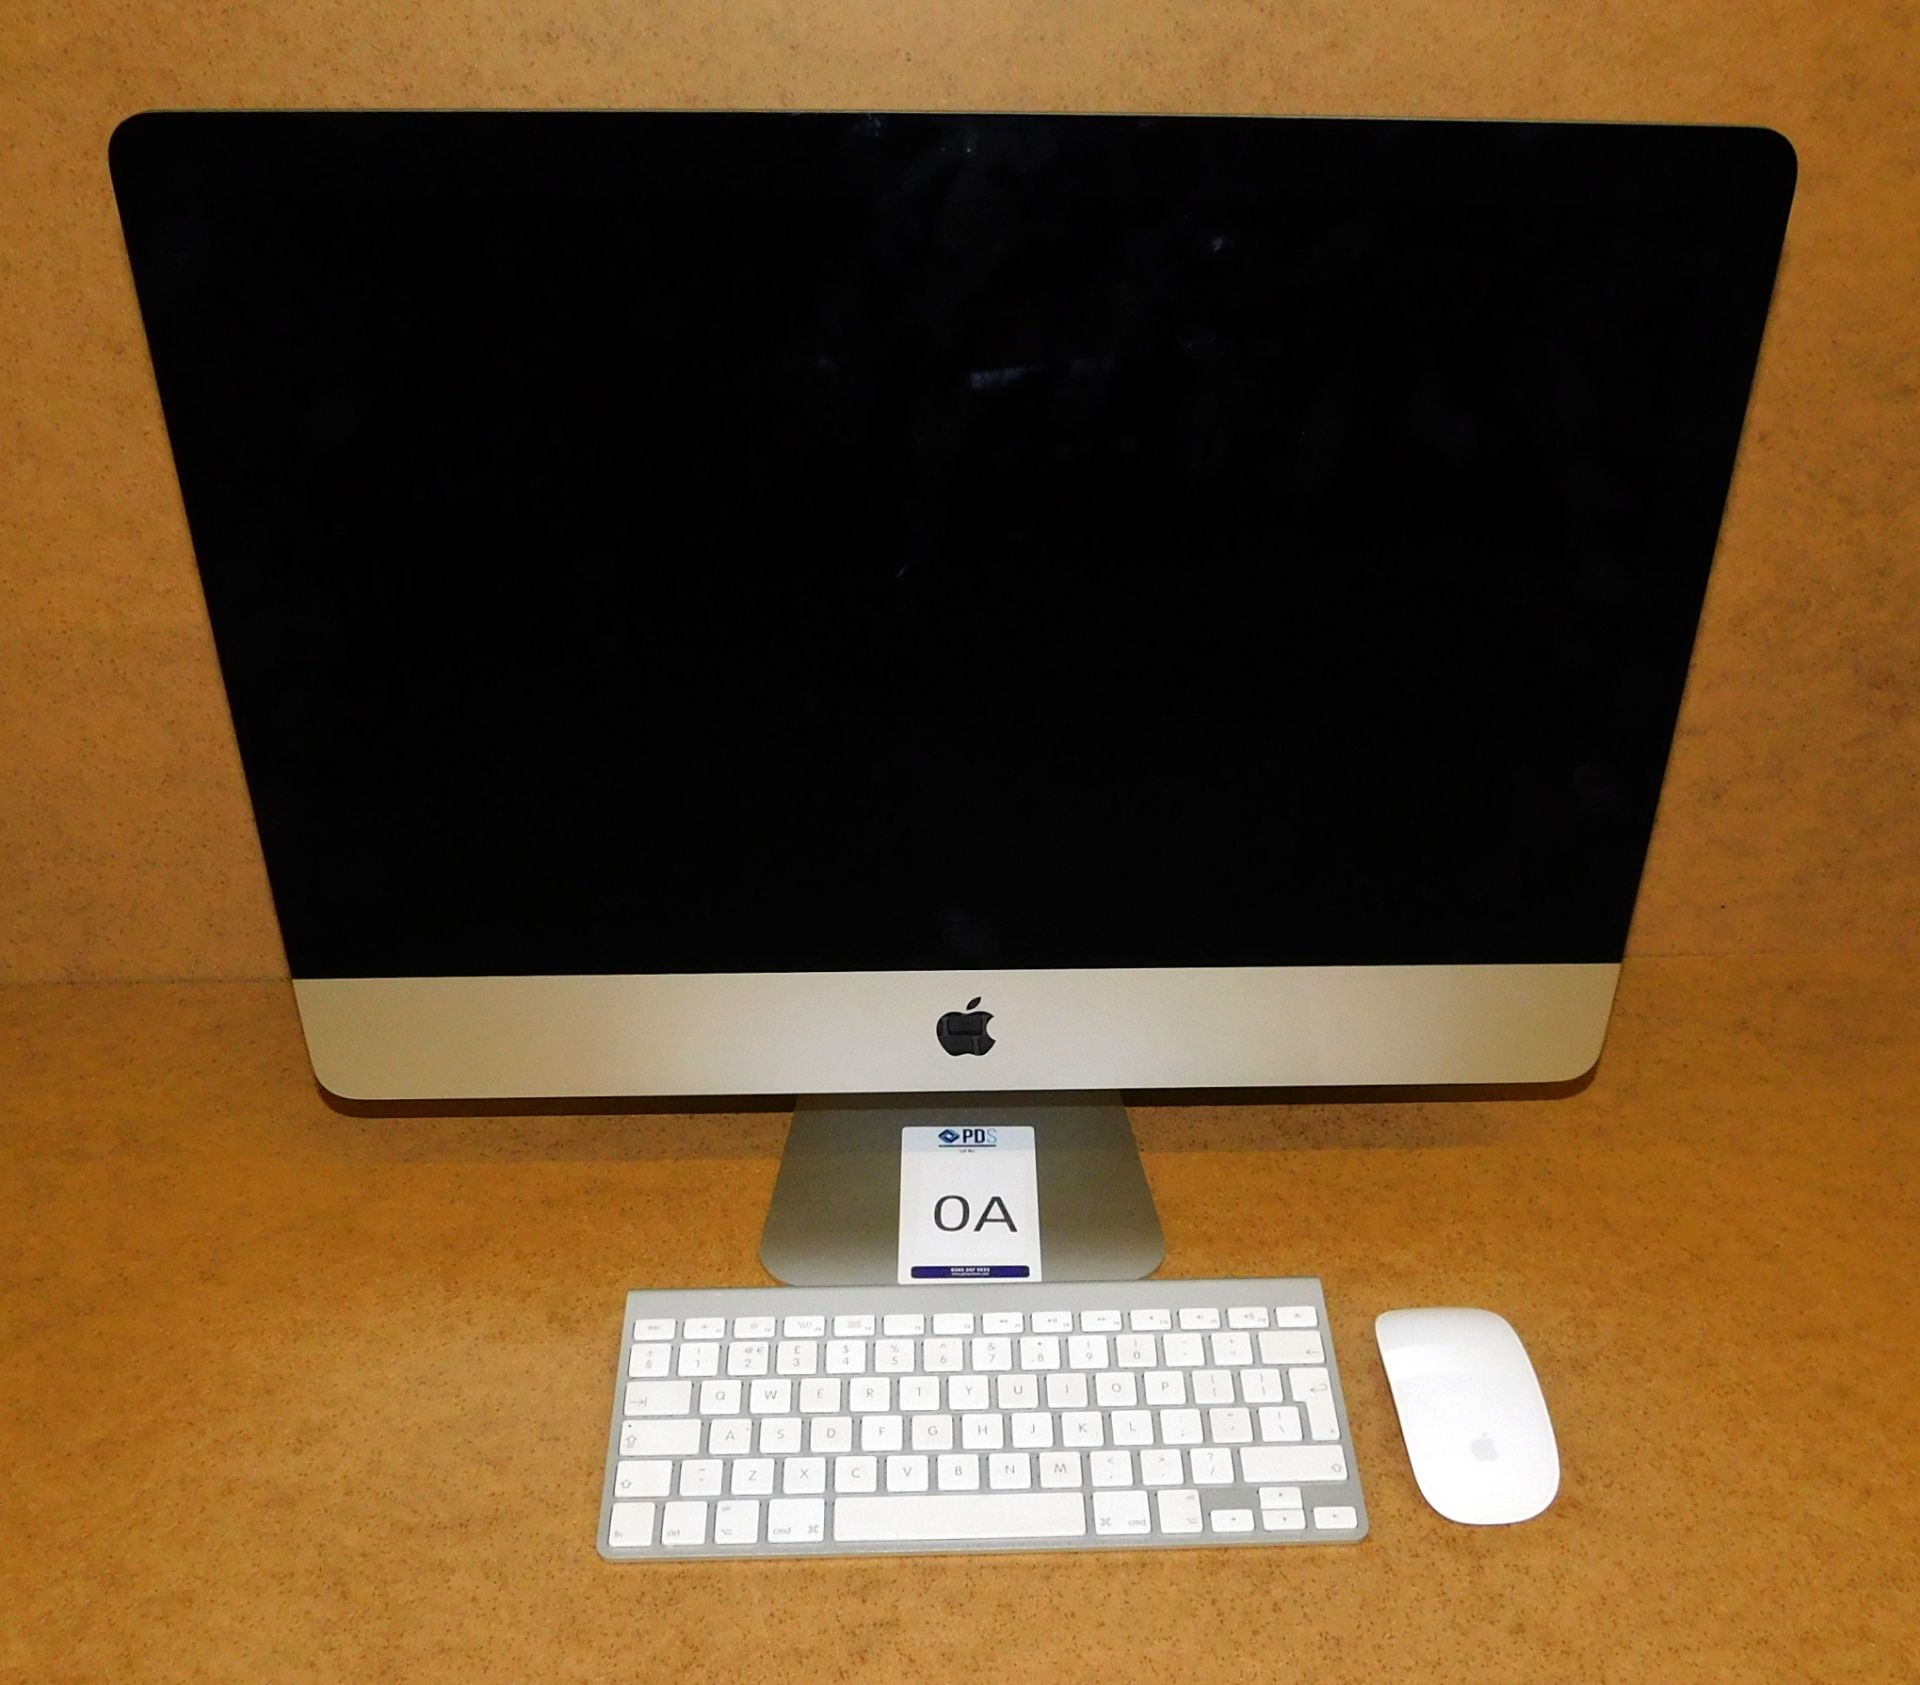 Apple A1418 iMac Core i5, 2.8ghz, 21.5inch , 1 TB HDD, 8gb RAM with Keyboard and Mouse, serial